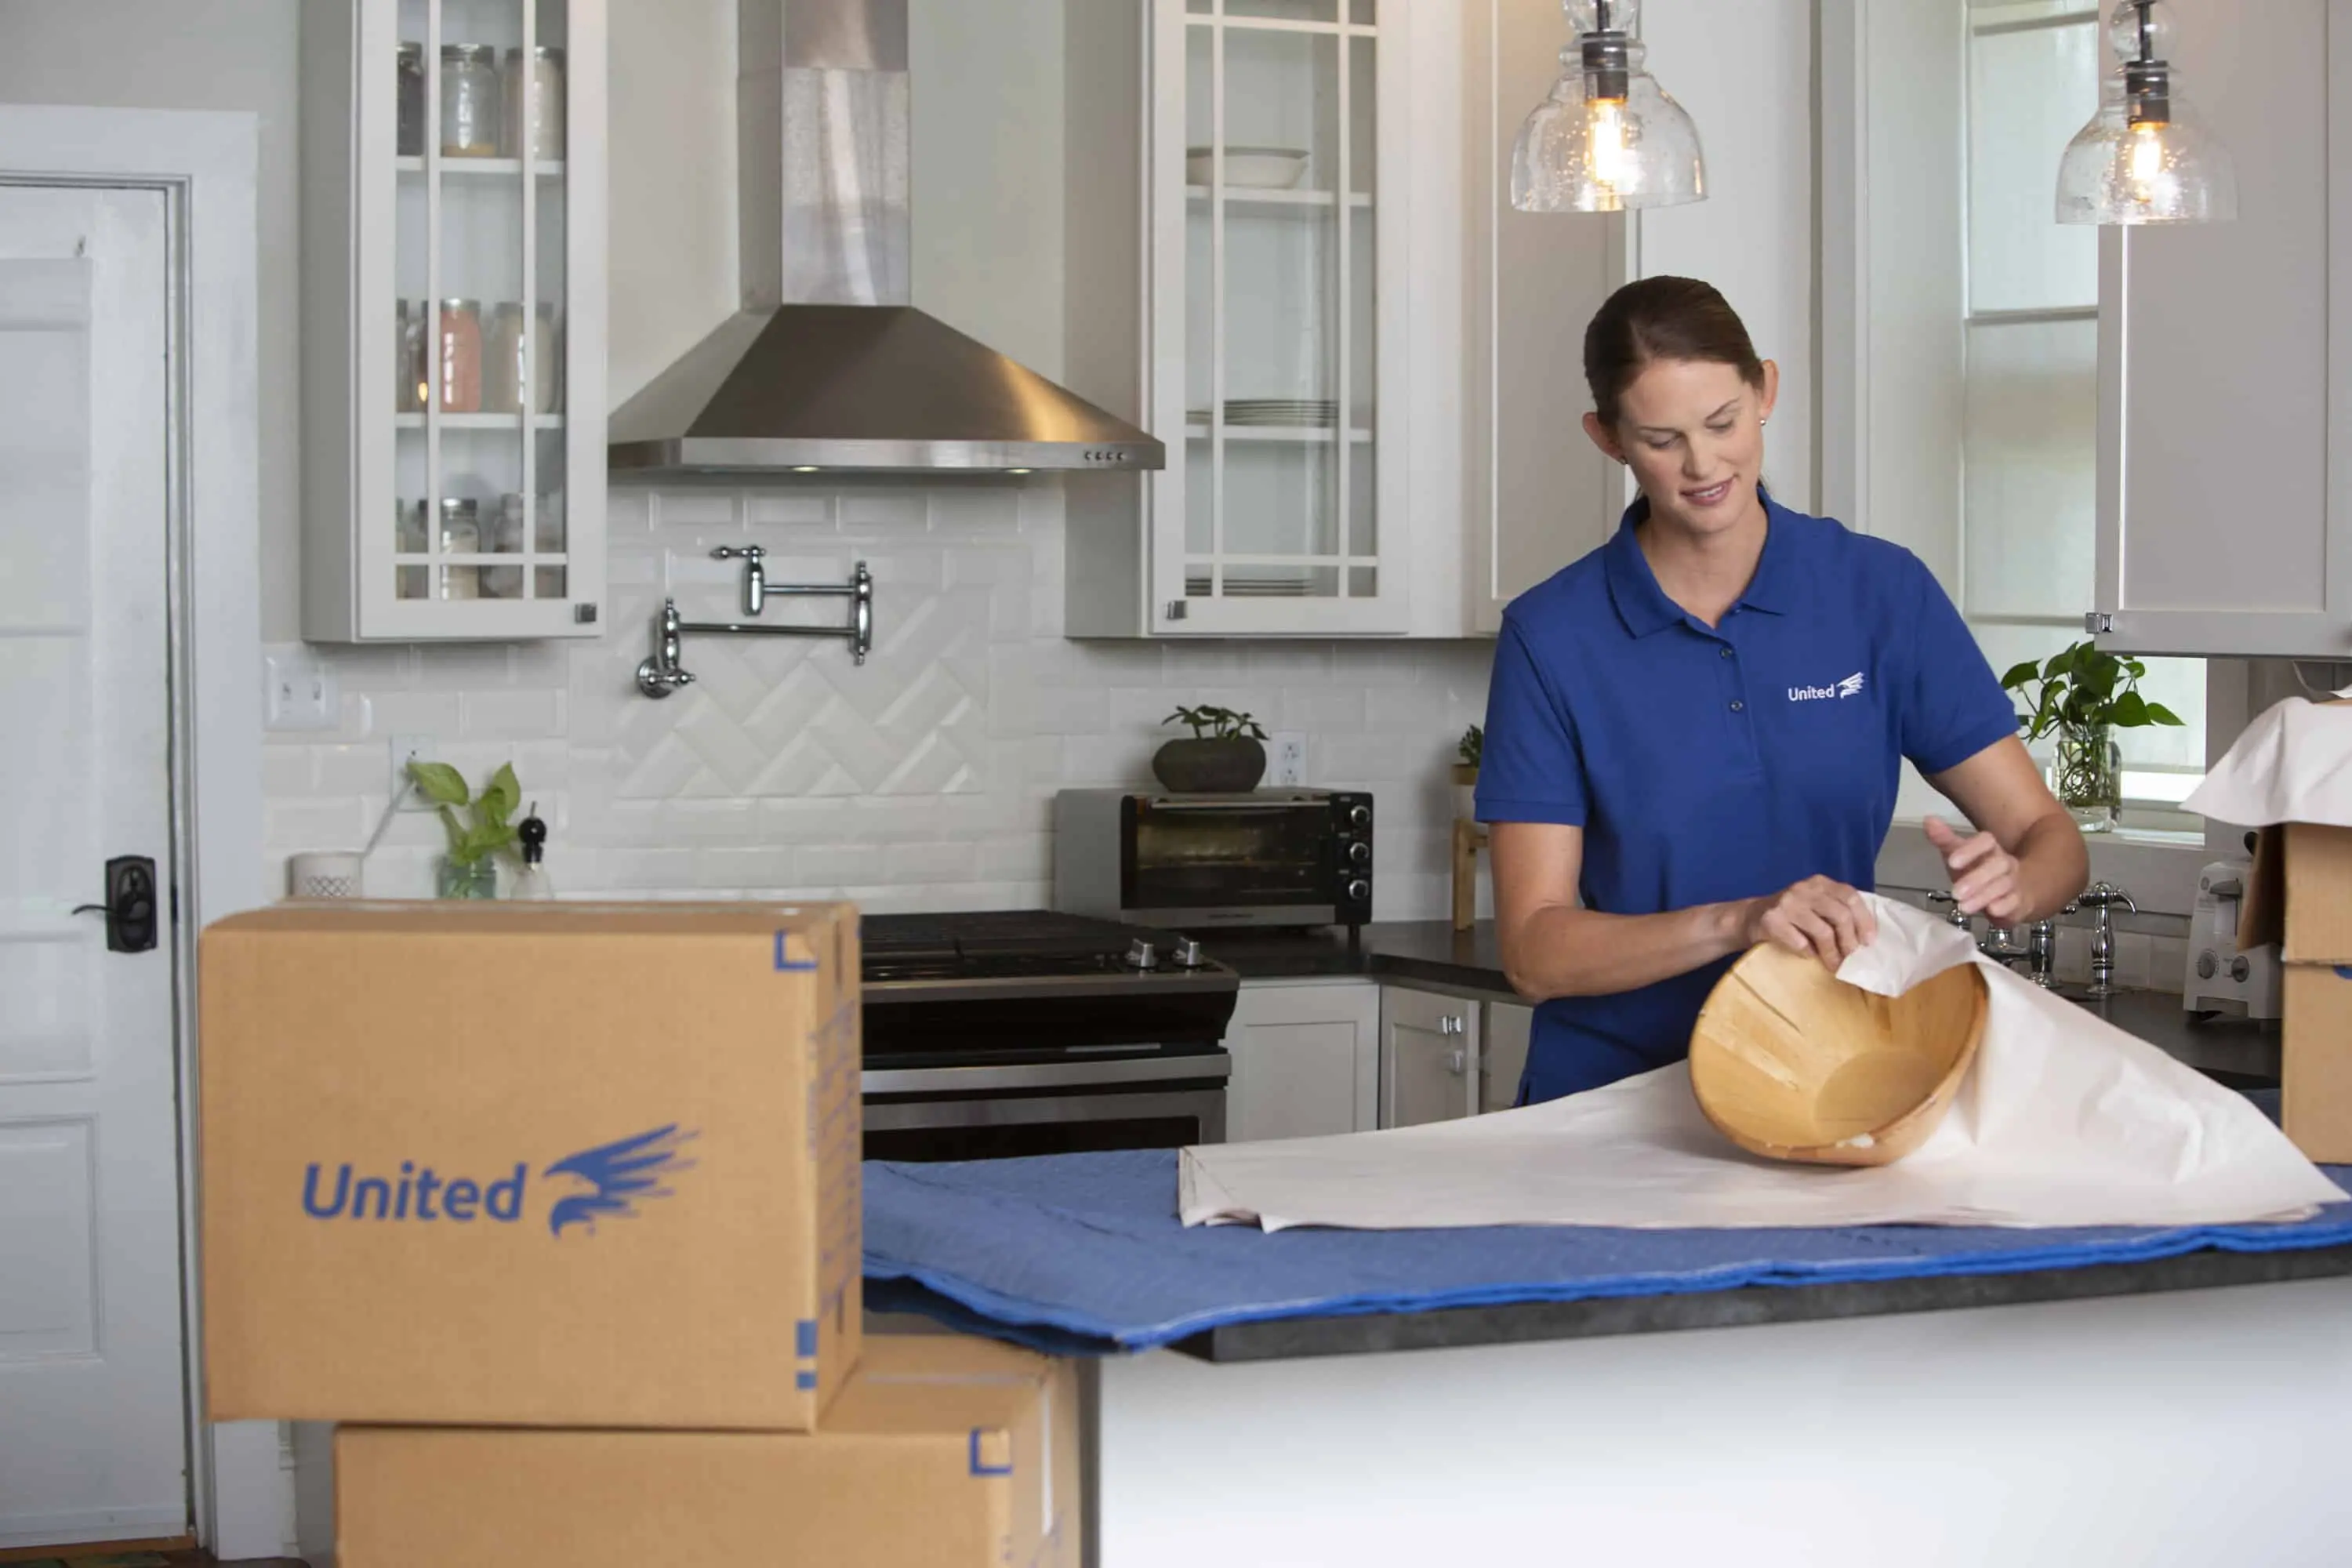 united mover packing up a customer's kitchen - United Van Lines®